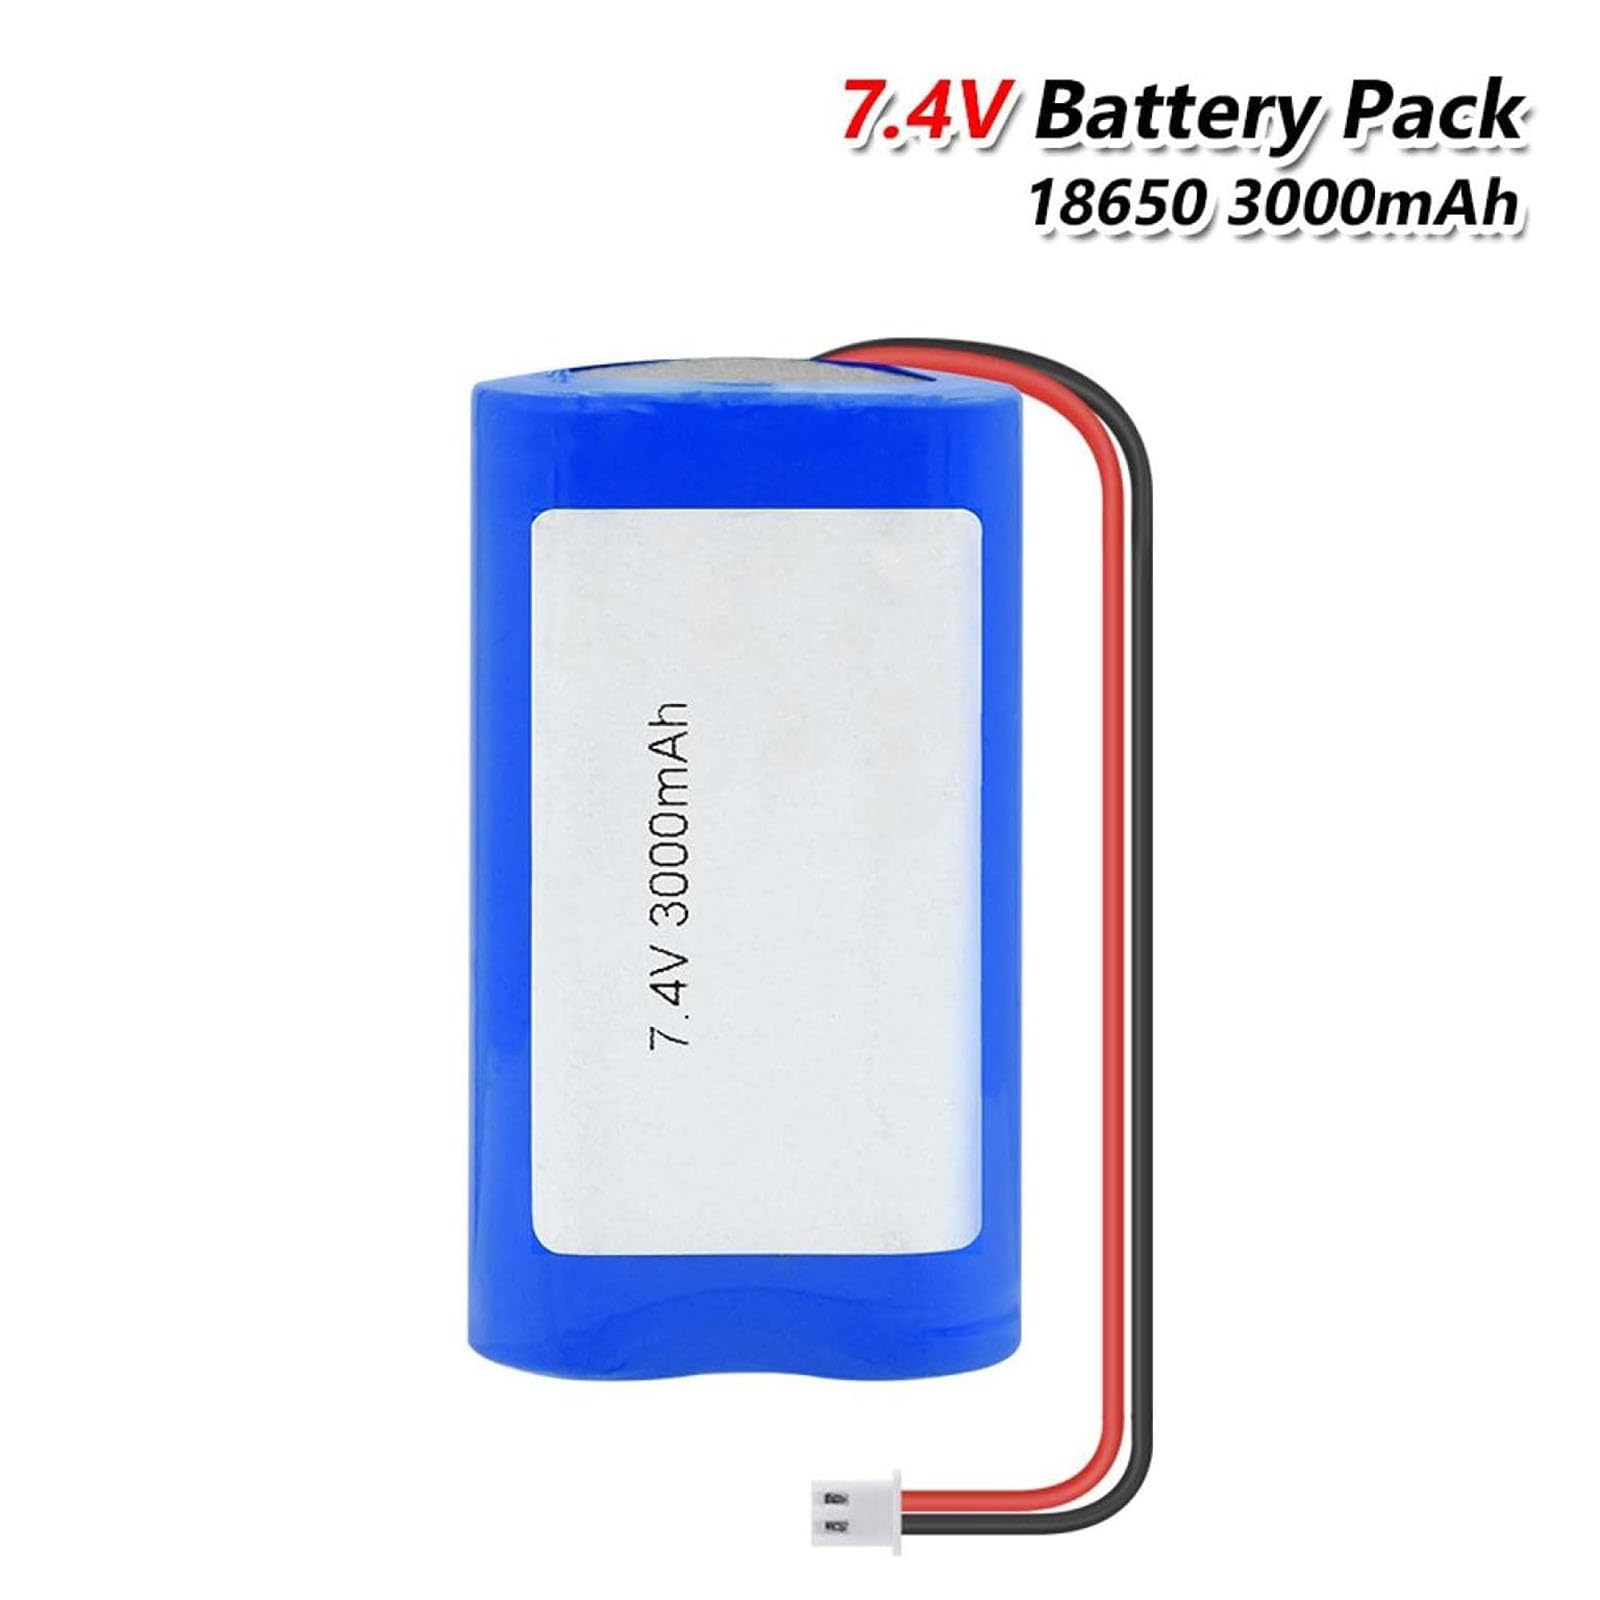 CSTAL 7.4V 3000Mah Lithium Battery Pack, High Performance Backup Battery with XH2.54 Connector, for DIY Power Bank Remote Control Flashlight